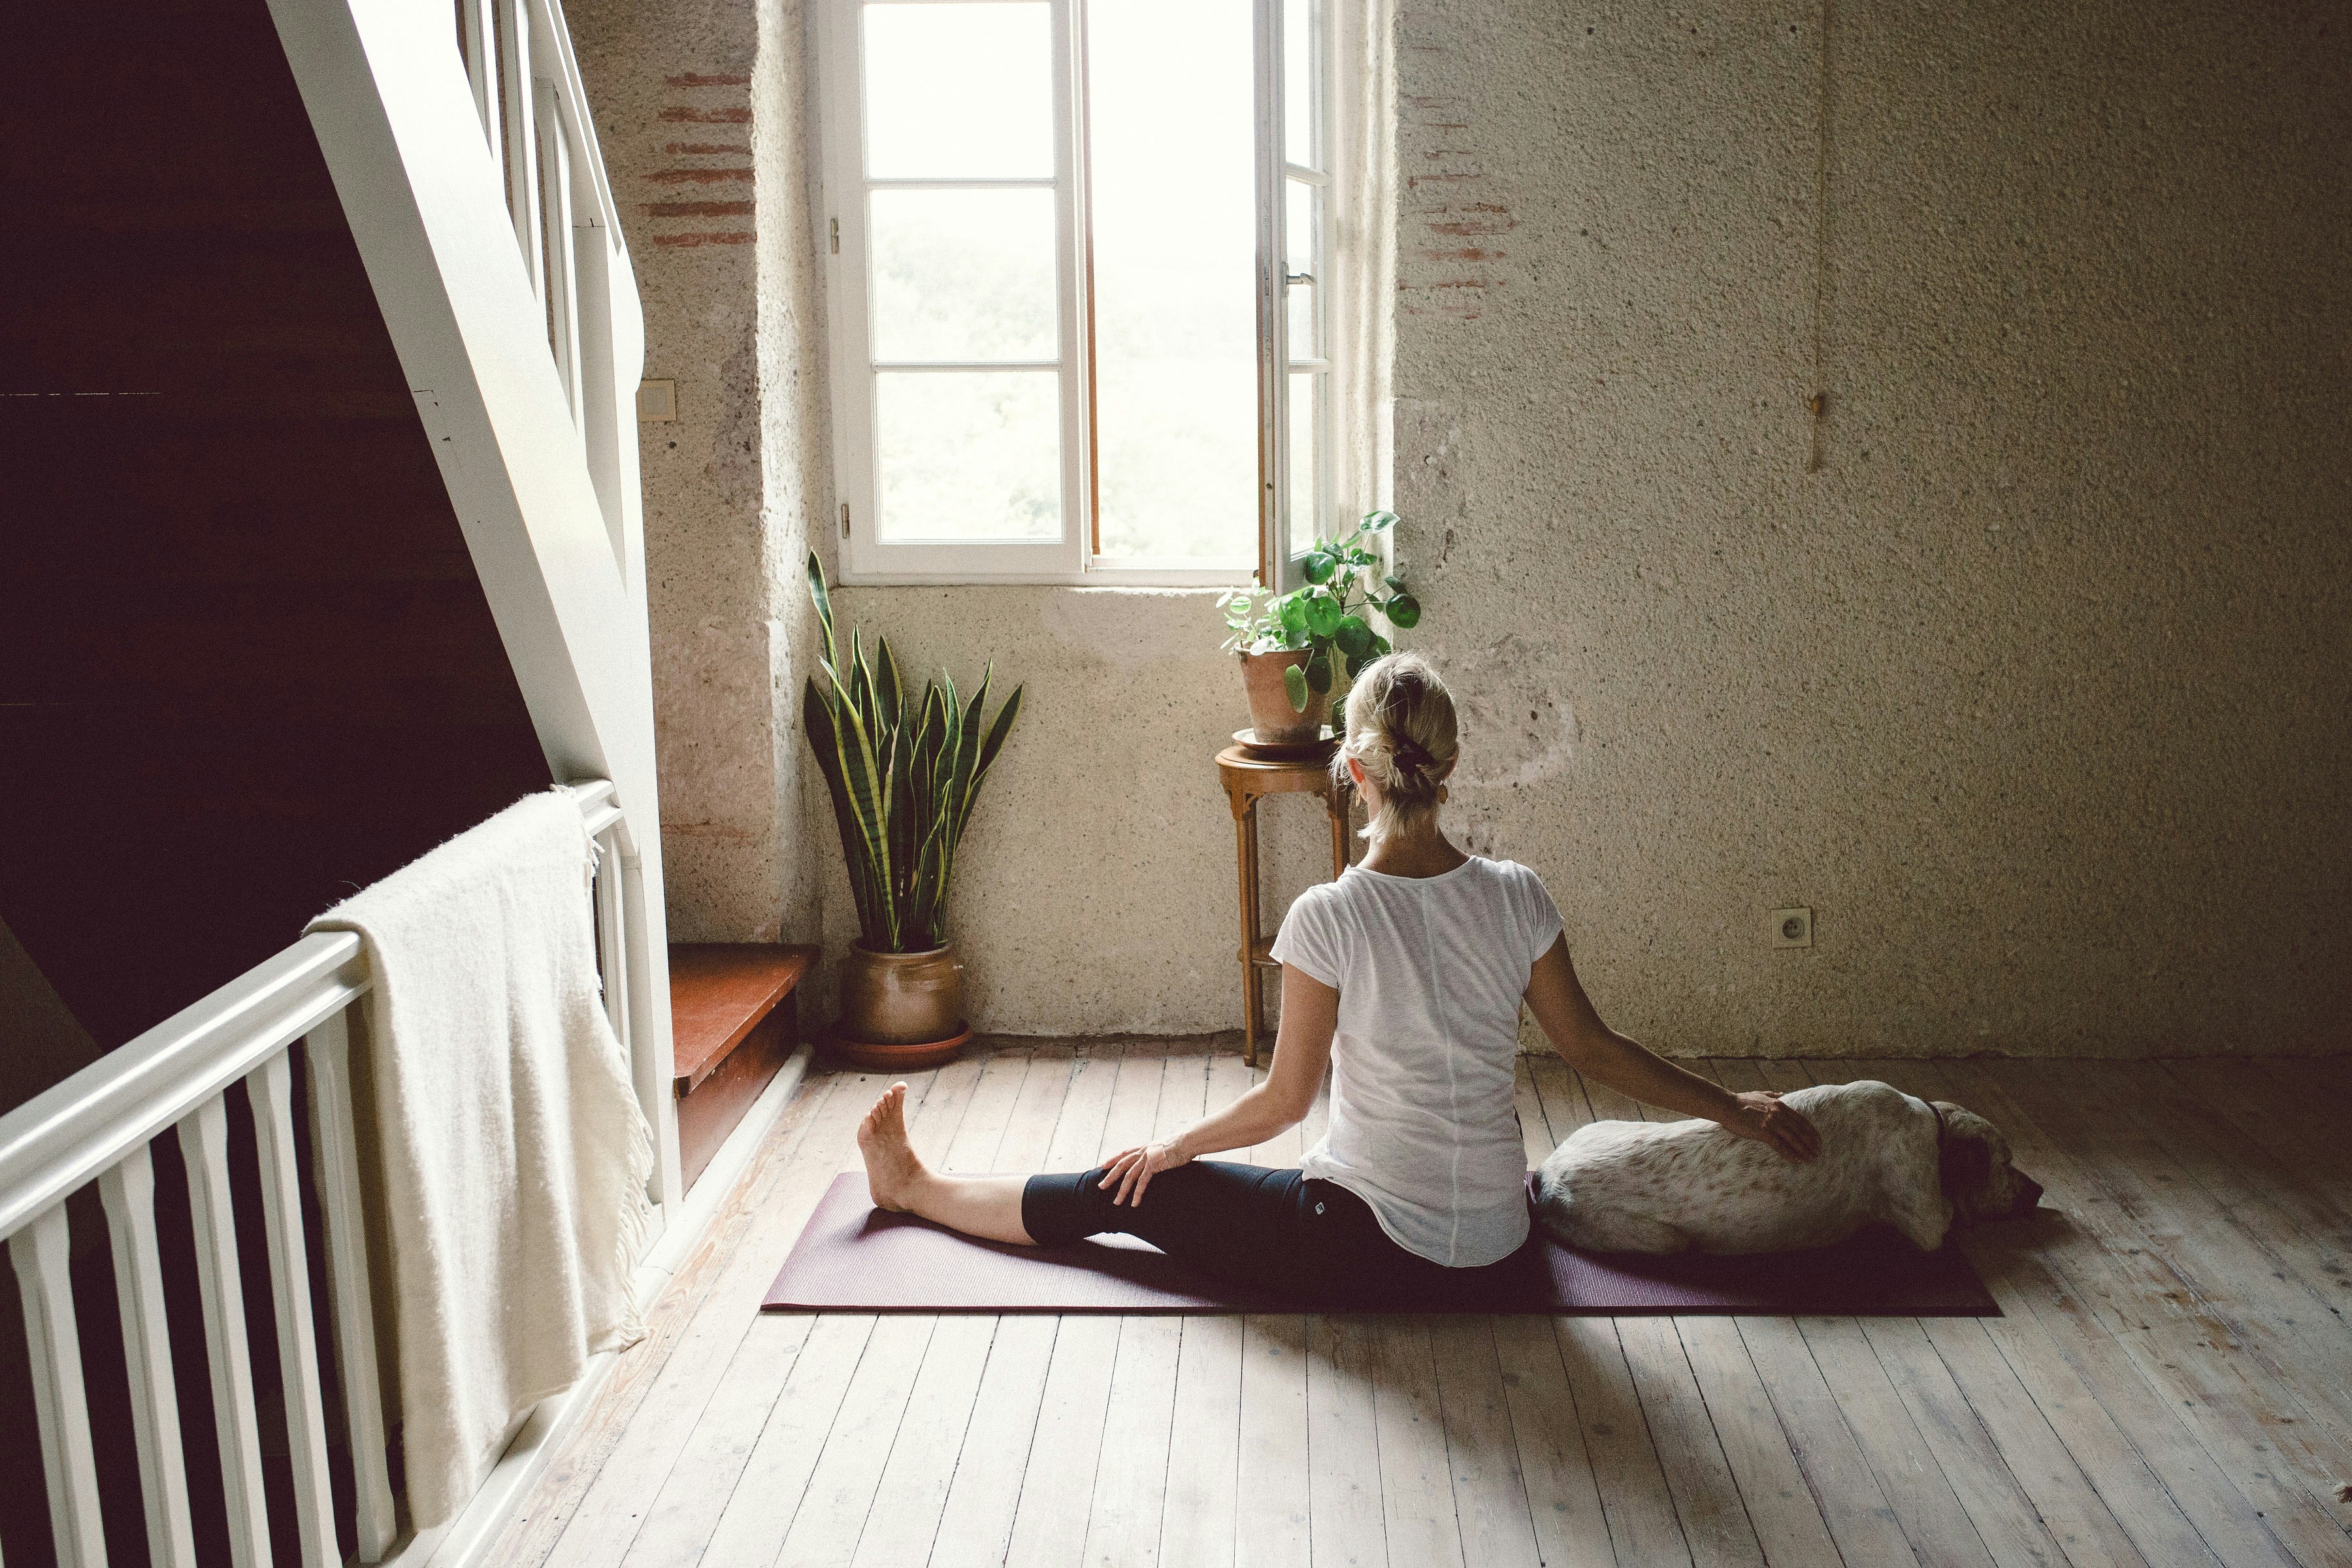 A woman is sitting with a dog on a yoga mat, in a sparsely furnished, white-painted room. Light is streaming through an open window and she is looking towards it, with her back to the camera.